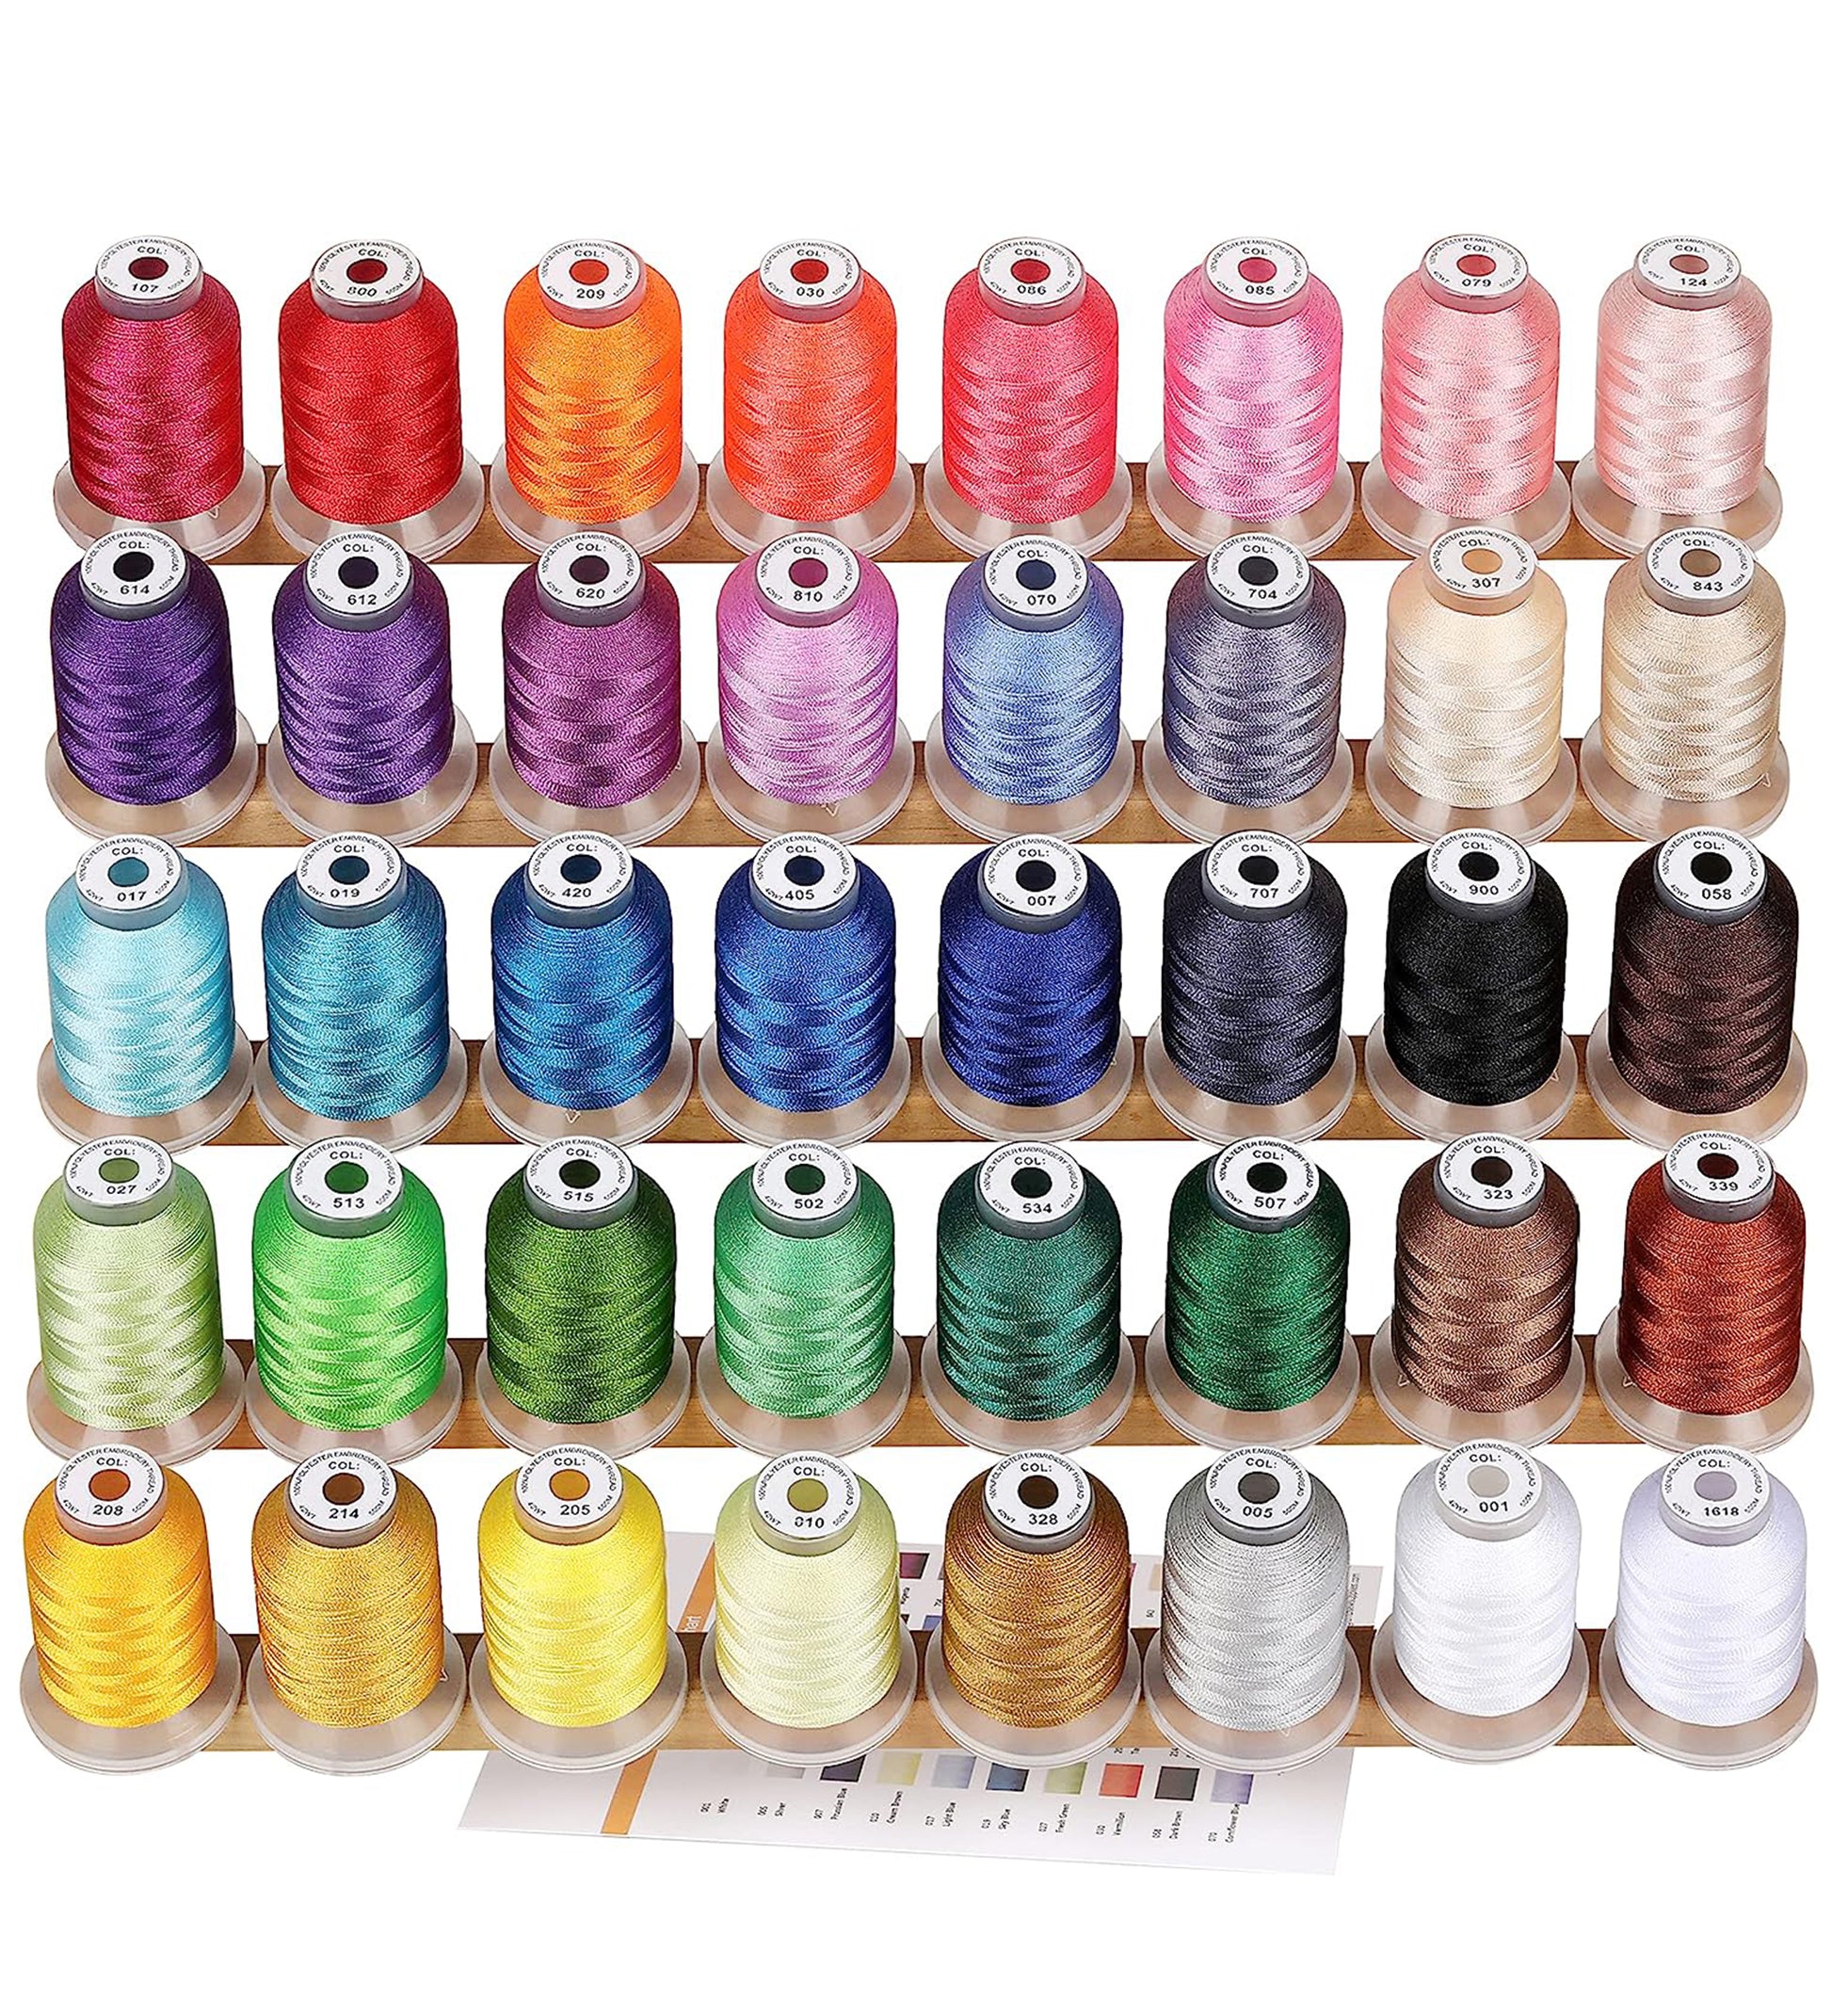 New brothread 50 Spools Embroidery Machine Thread Kit Including 40 Brother  Colors+8 Variegated Colors+2 Metallic Colors for Brother Janome Singer  Pfaff Husqvarna Embroidery Sewing Machines